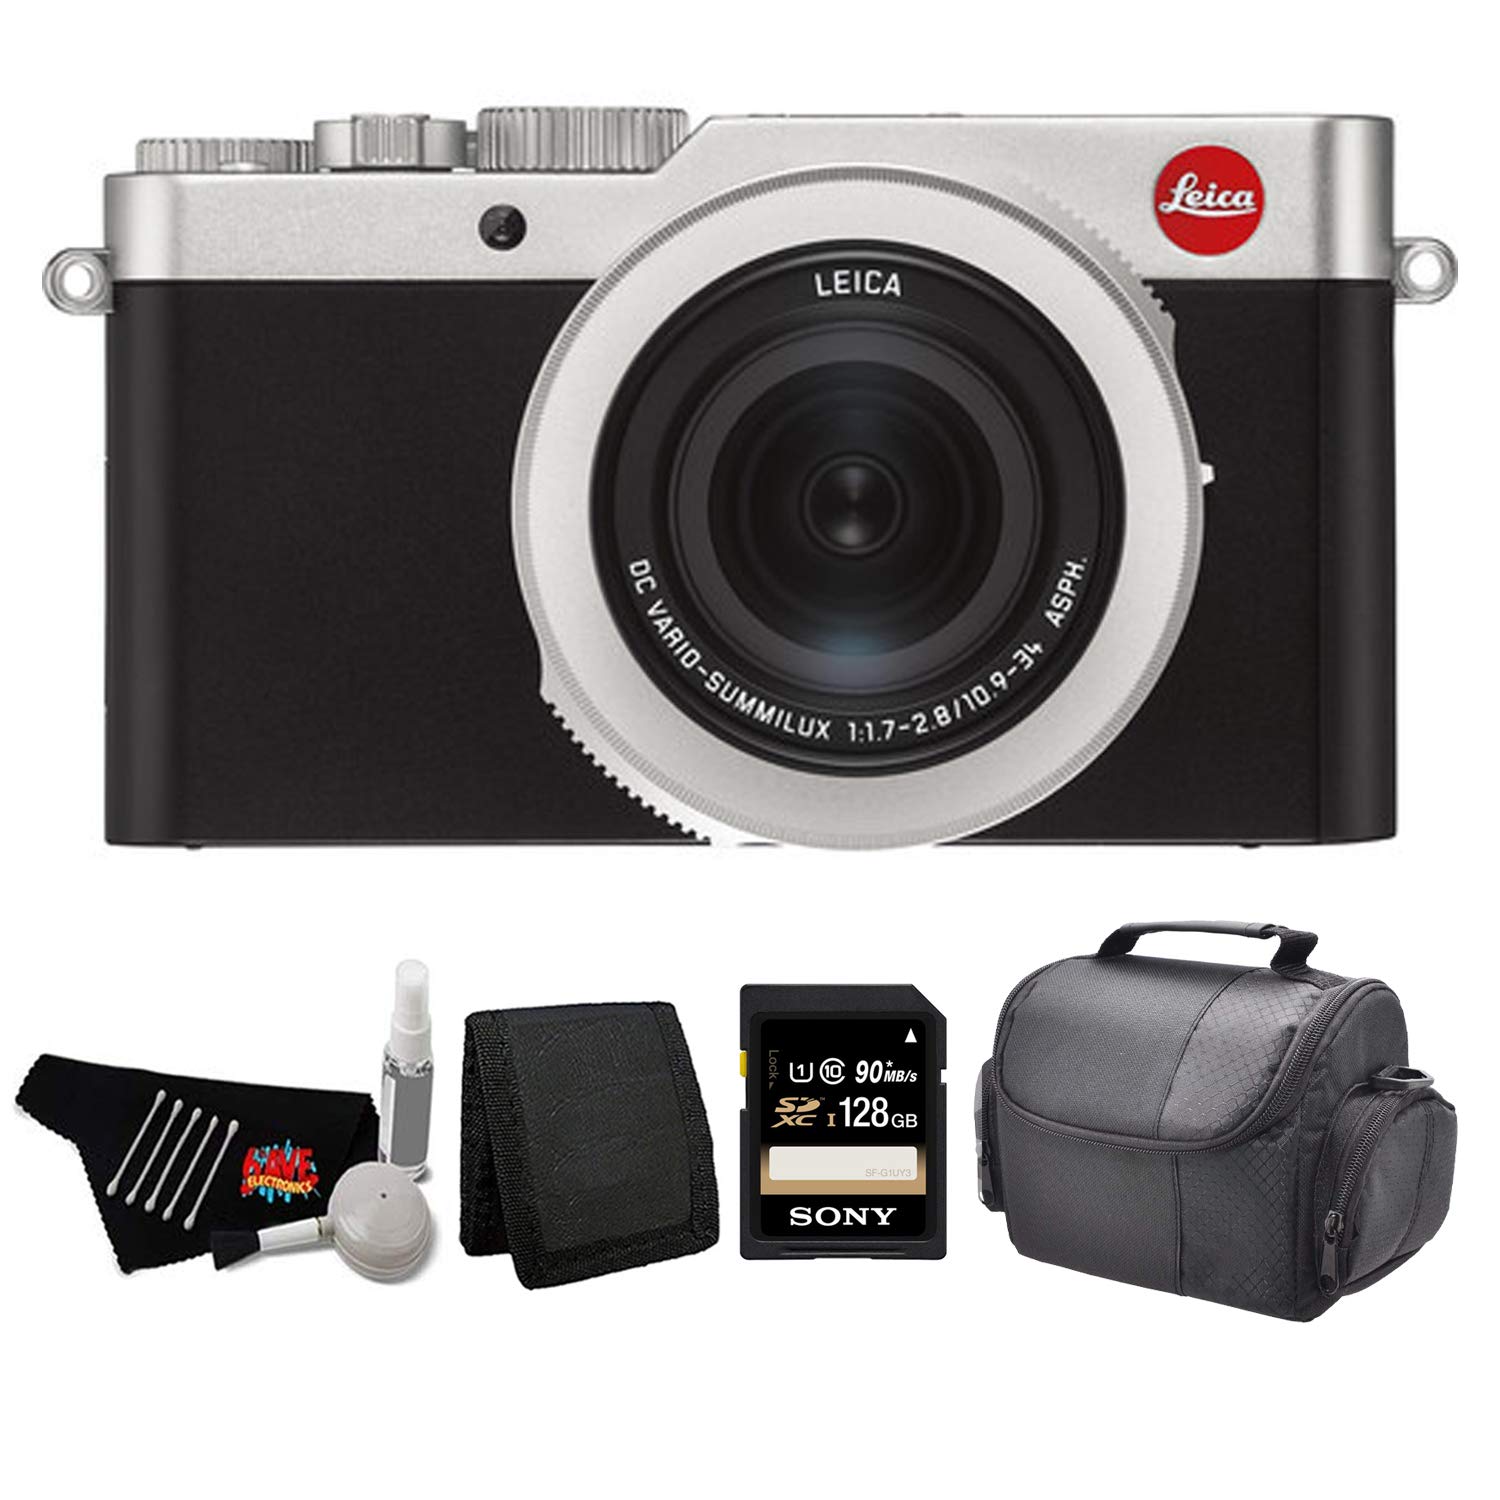 Leica D-Lux 7 Point and Shoot Digital Camera Kit + - image 1 of 6